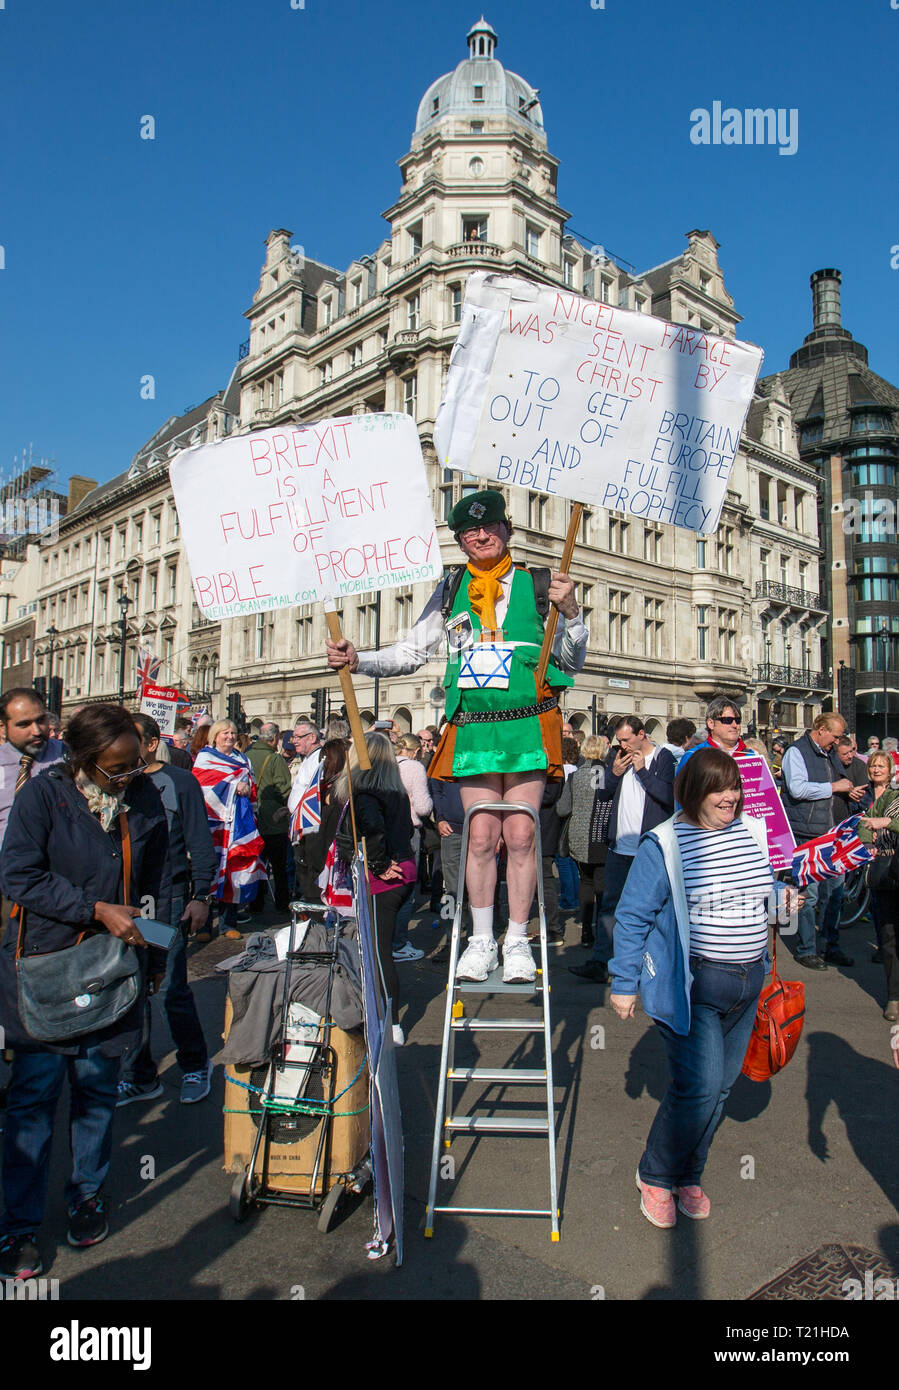 BREXIT Protests on the day the UK was due to leave Europe, in Central London, England on 29 March 2019. Photo by Andy Rowland. Stock Photo